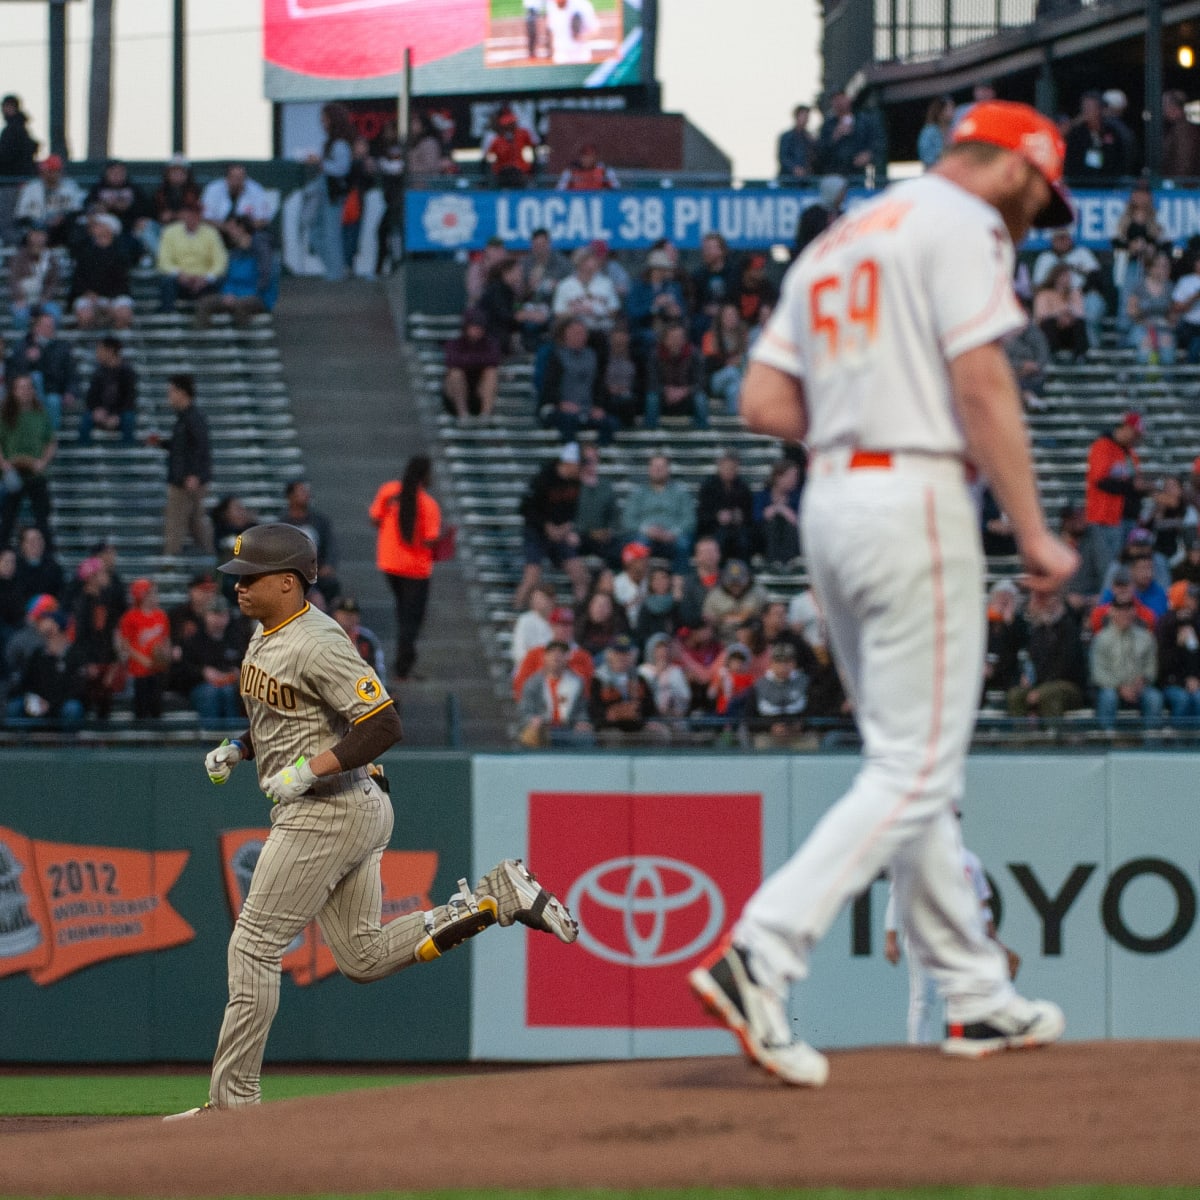 SF Giants pour it on in 15-0 rout of archrival Dodgers